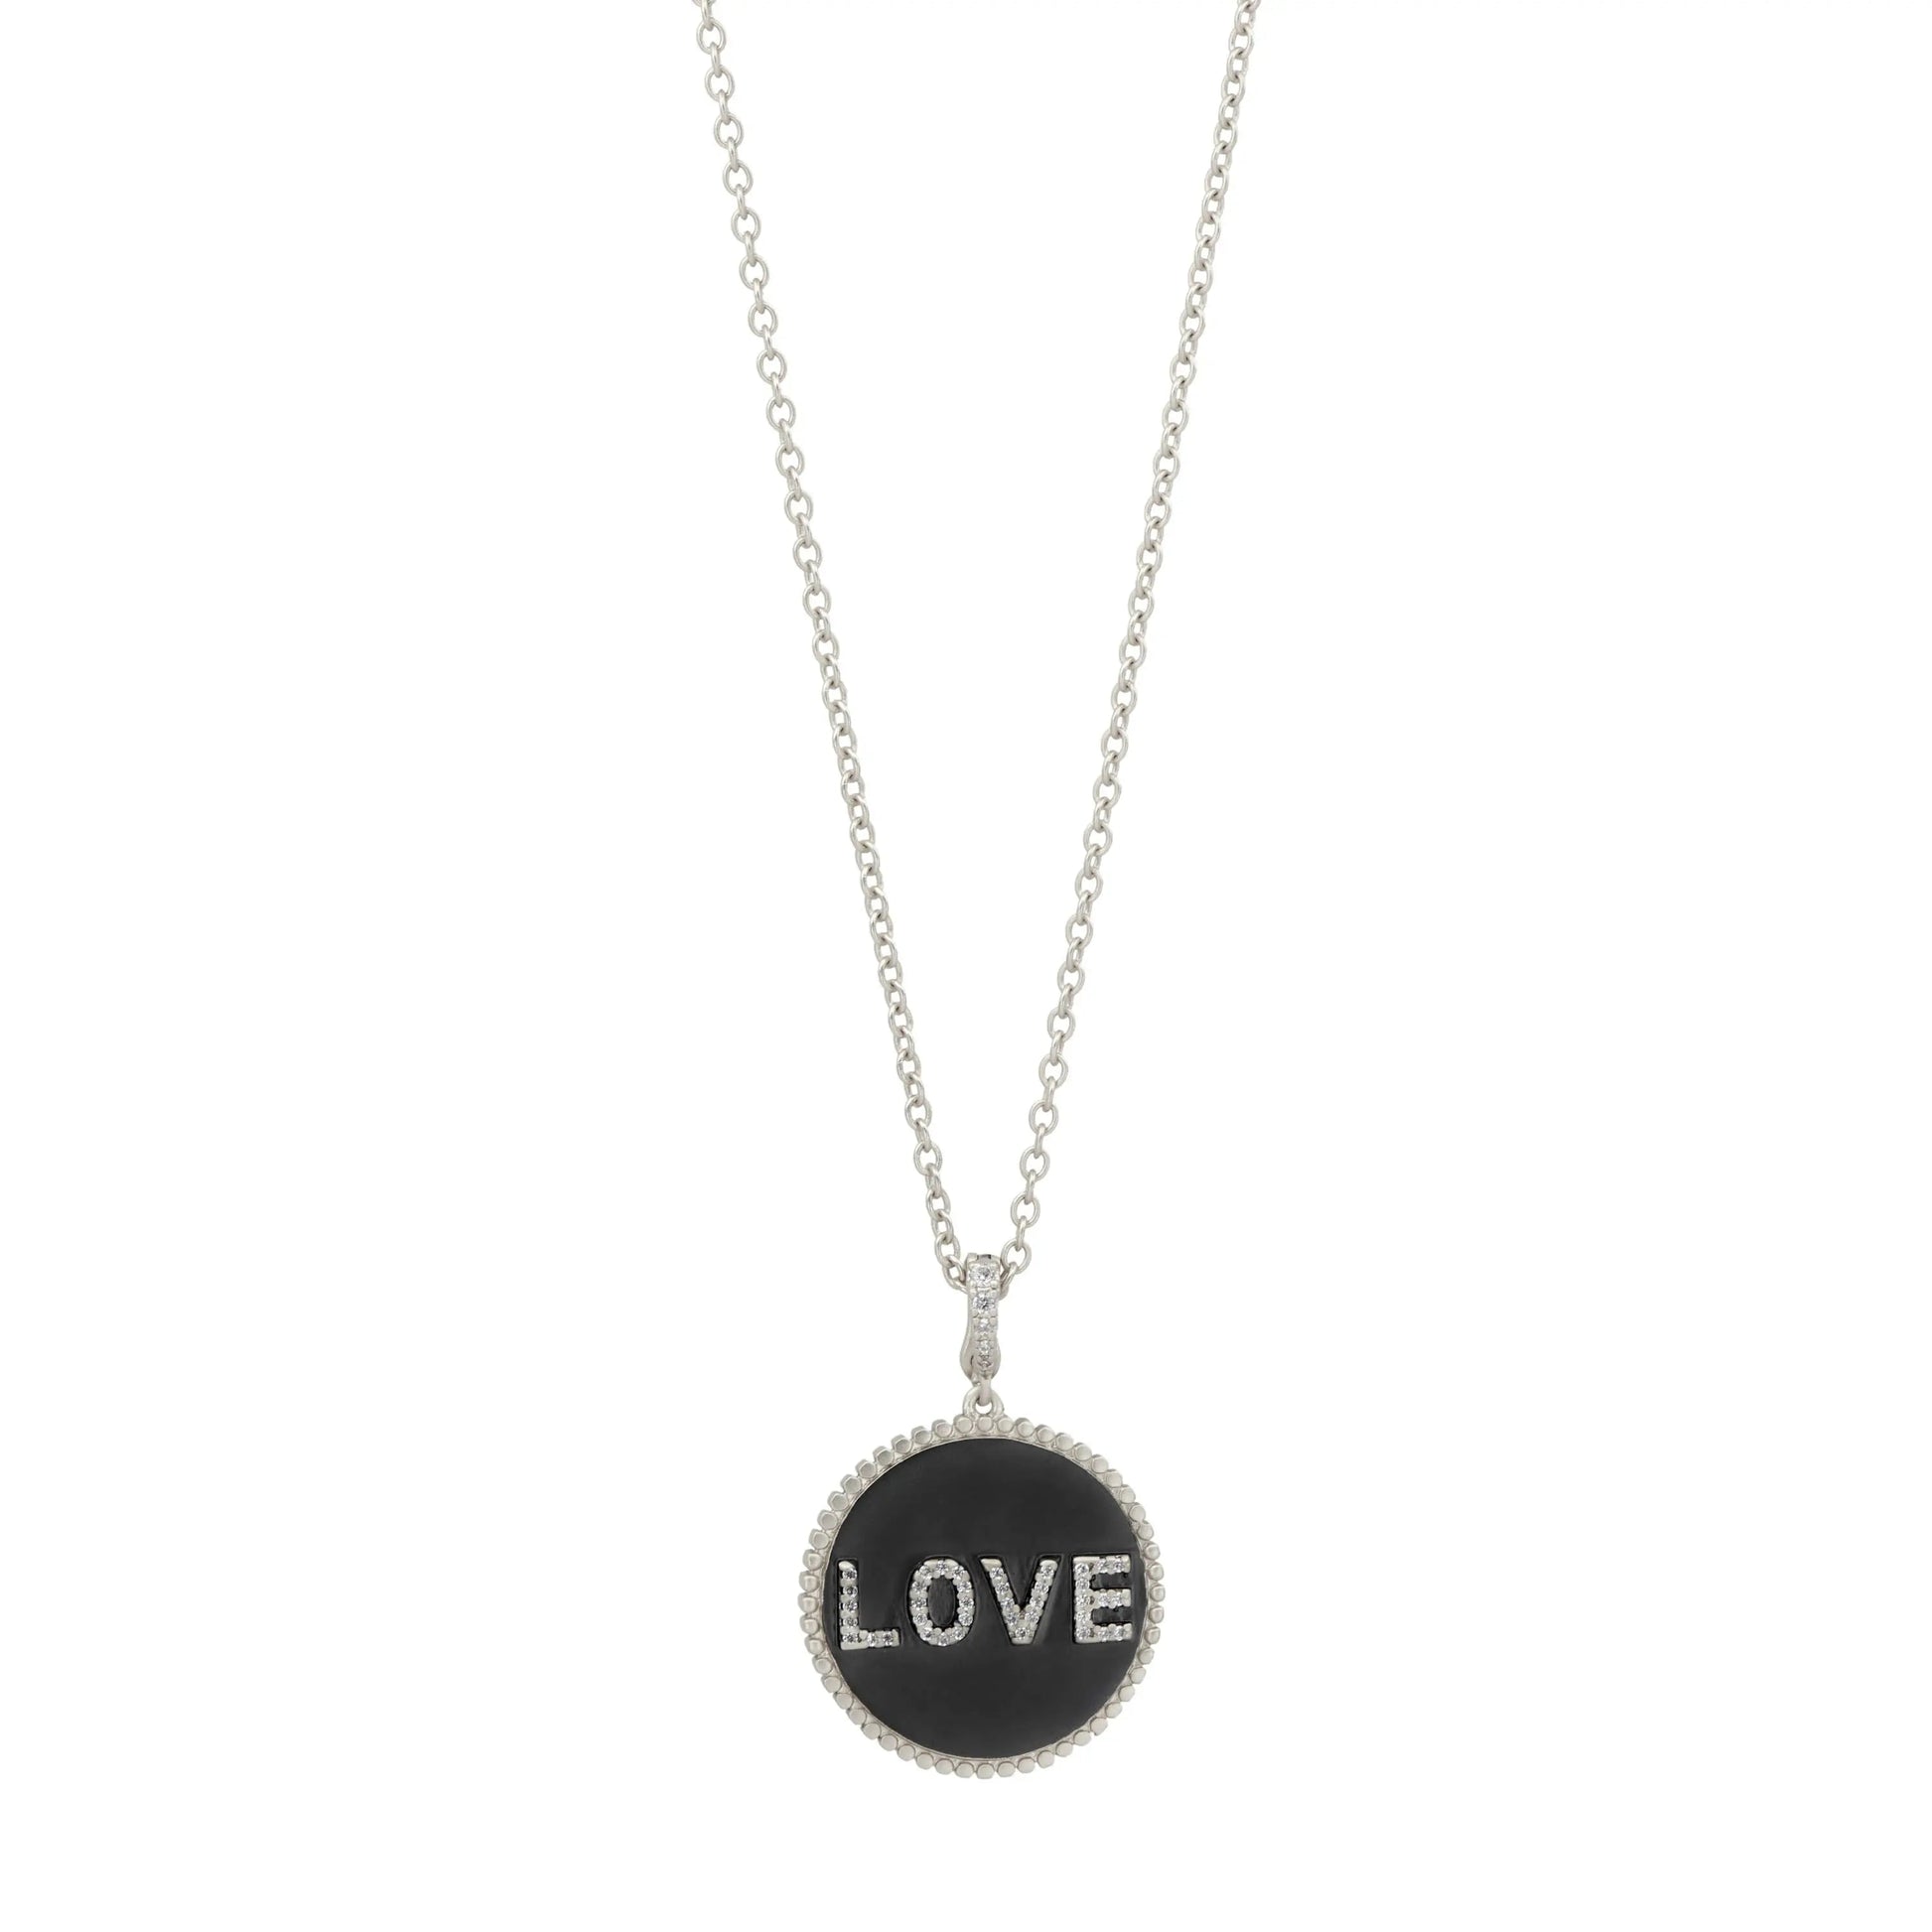 BlackSilver Double Sided LOVE Pendant Necklace Women of Strength NECKLACE